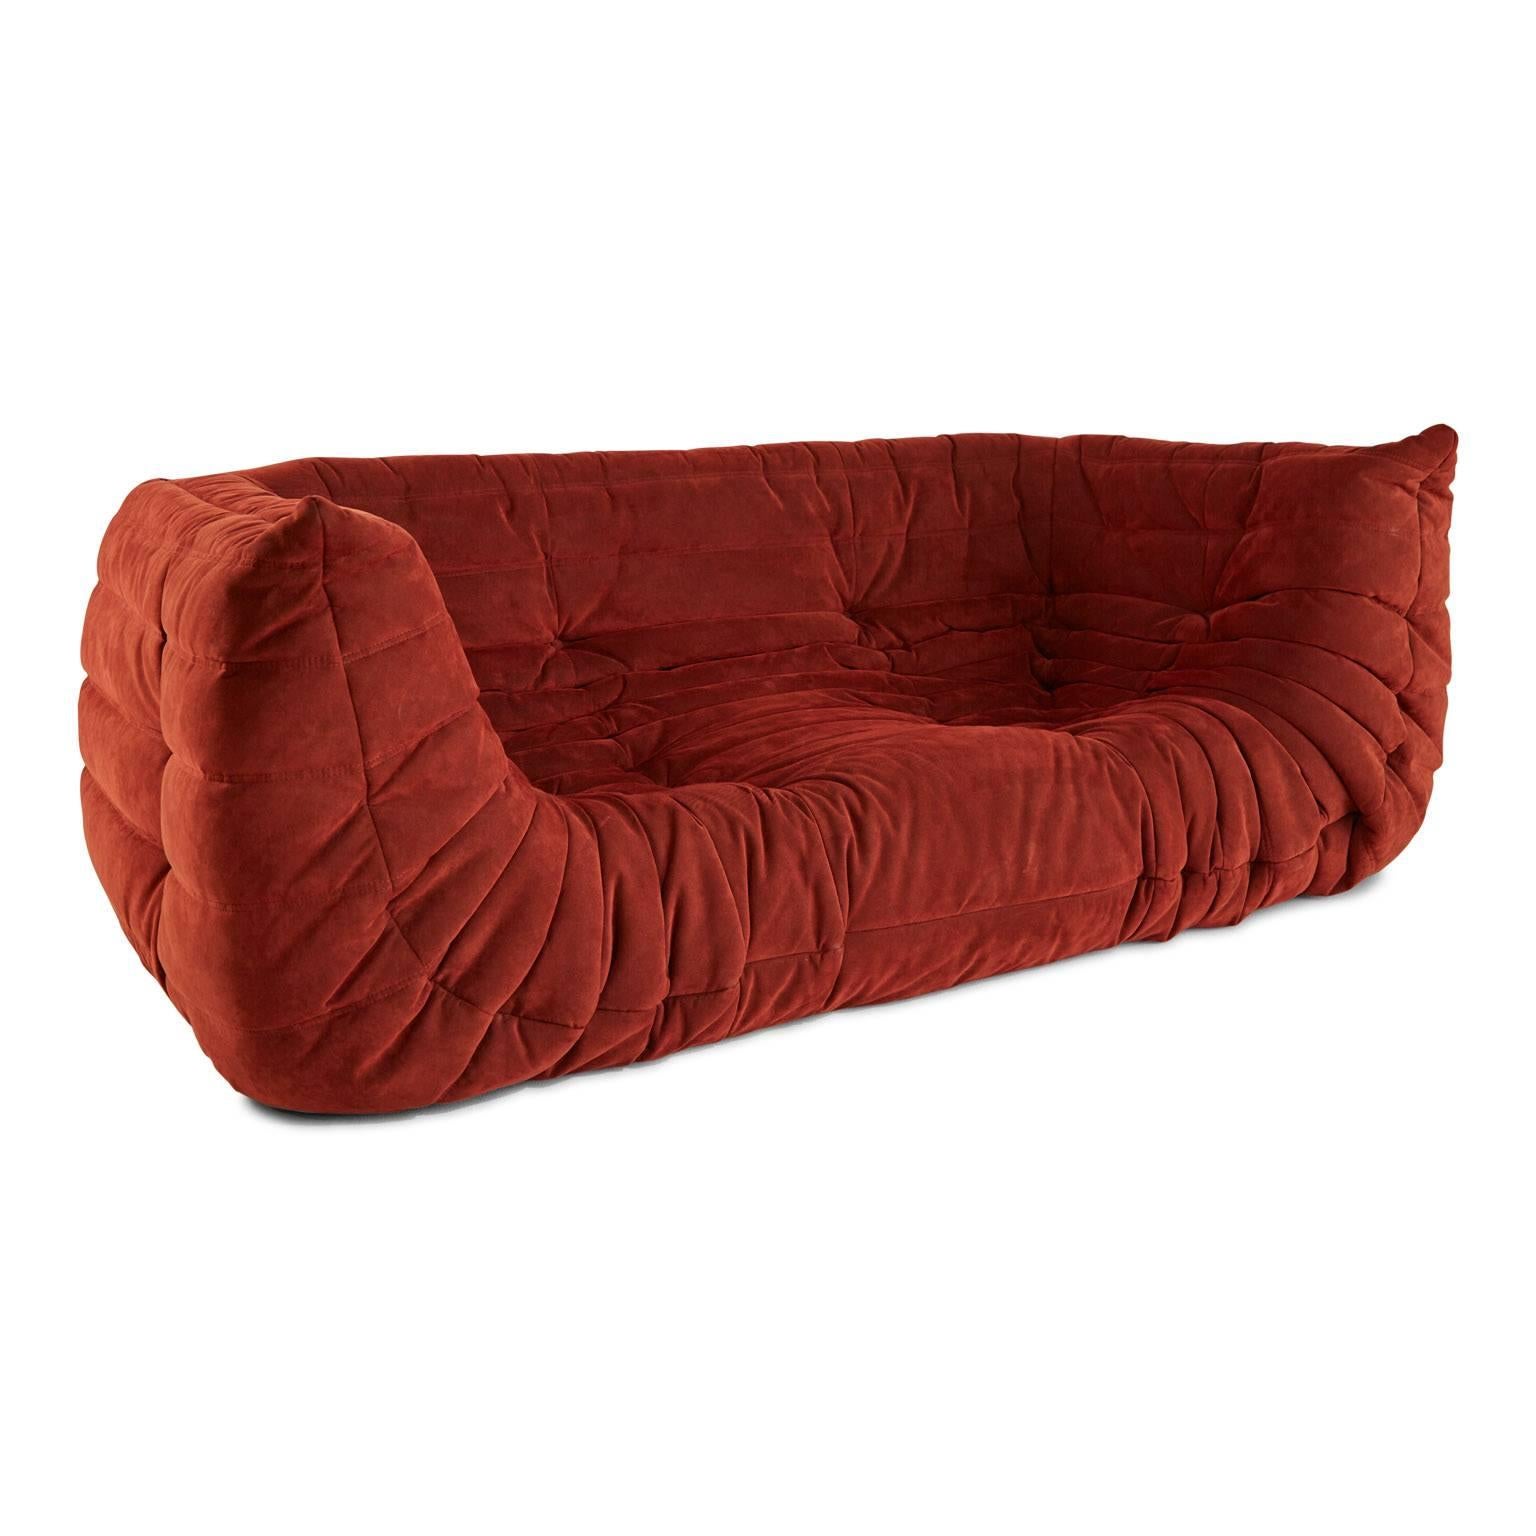 Timeless Ligne Roset Togo settee sofa designed by Michel Ducaroy in 1973. This sofa features ergonomic design with multiple density foam construction and generously quilted cover which are in Ligne Roset's Red Alcantara colorway. 

This iconic